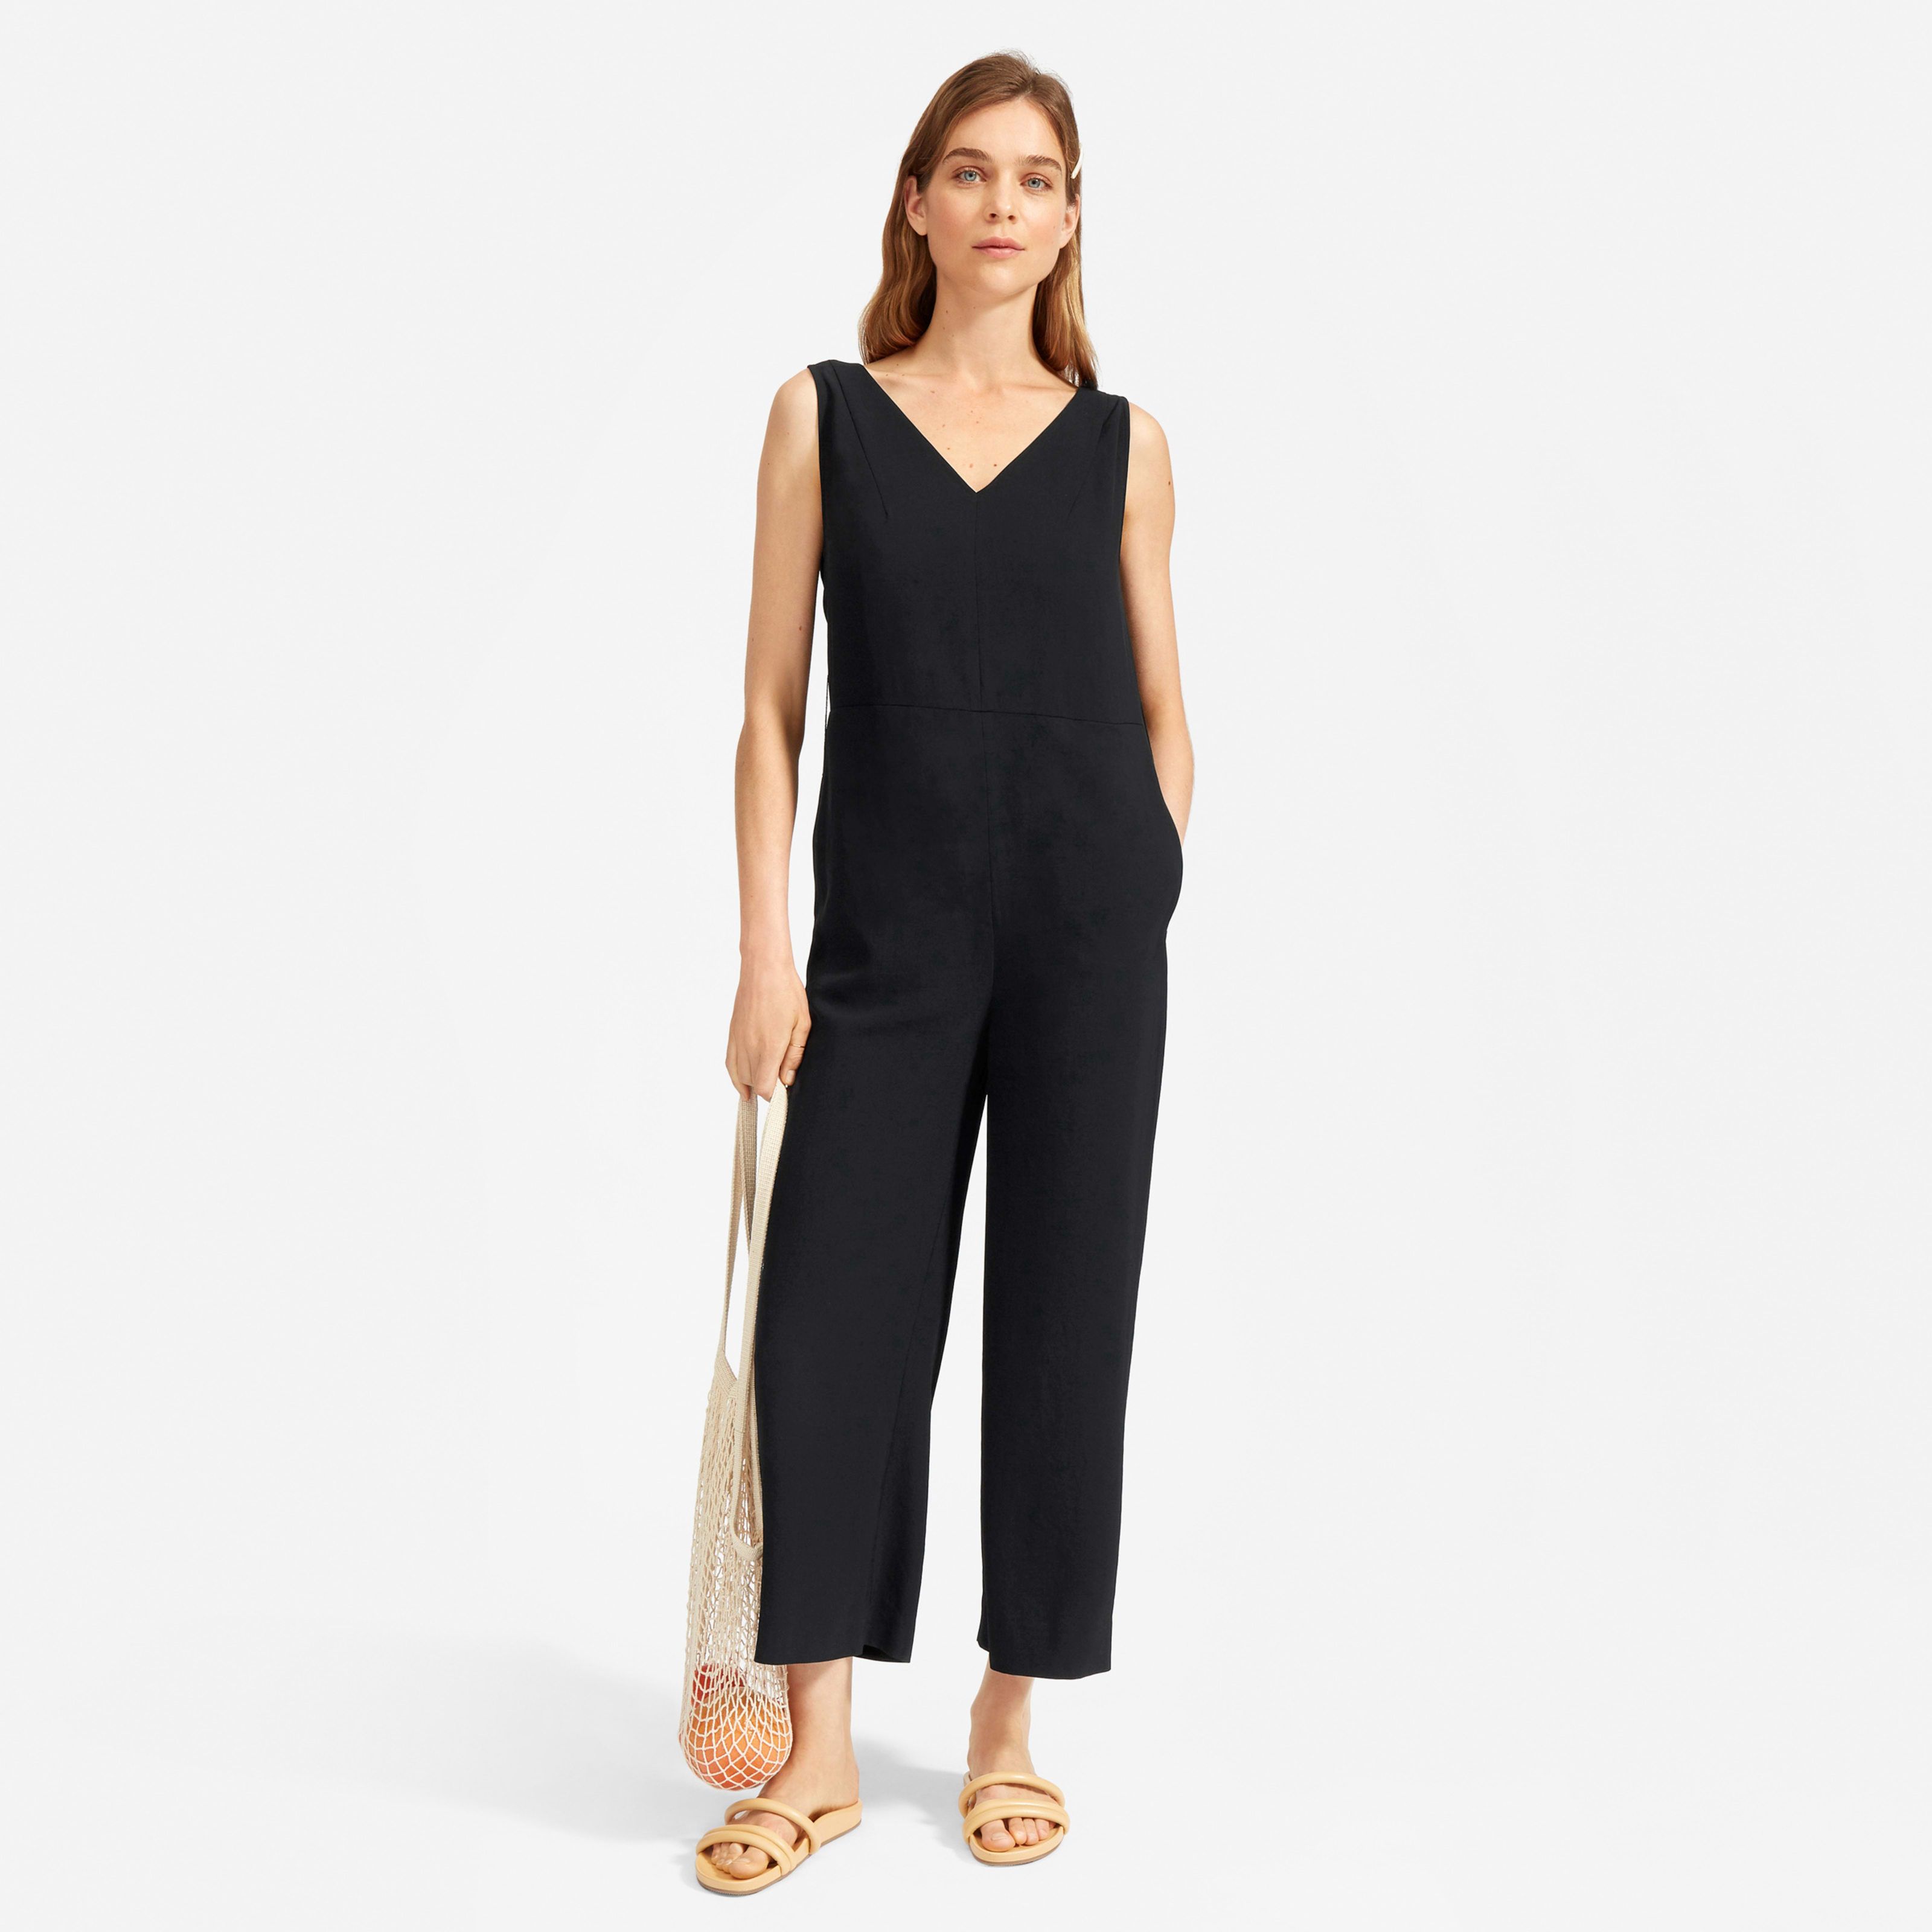 Women's Japanese GoWeave Essential Jumpsuit by Everlane in Black, Size 8 | Everlane